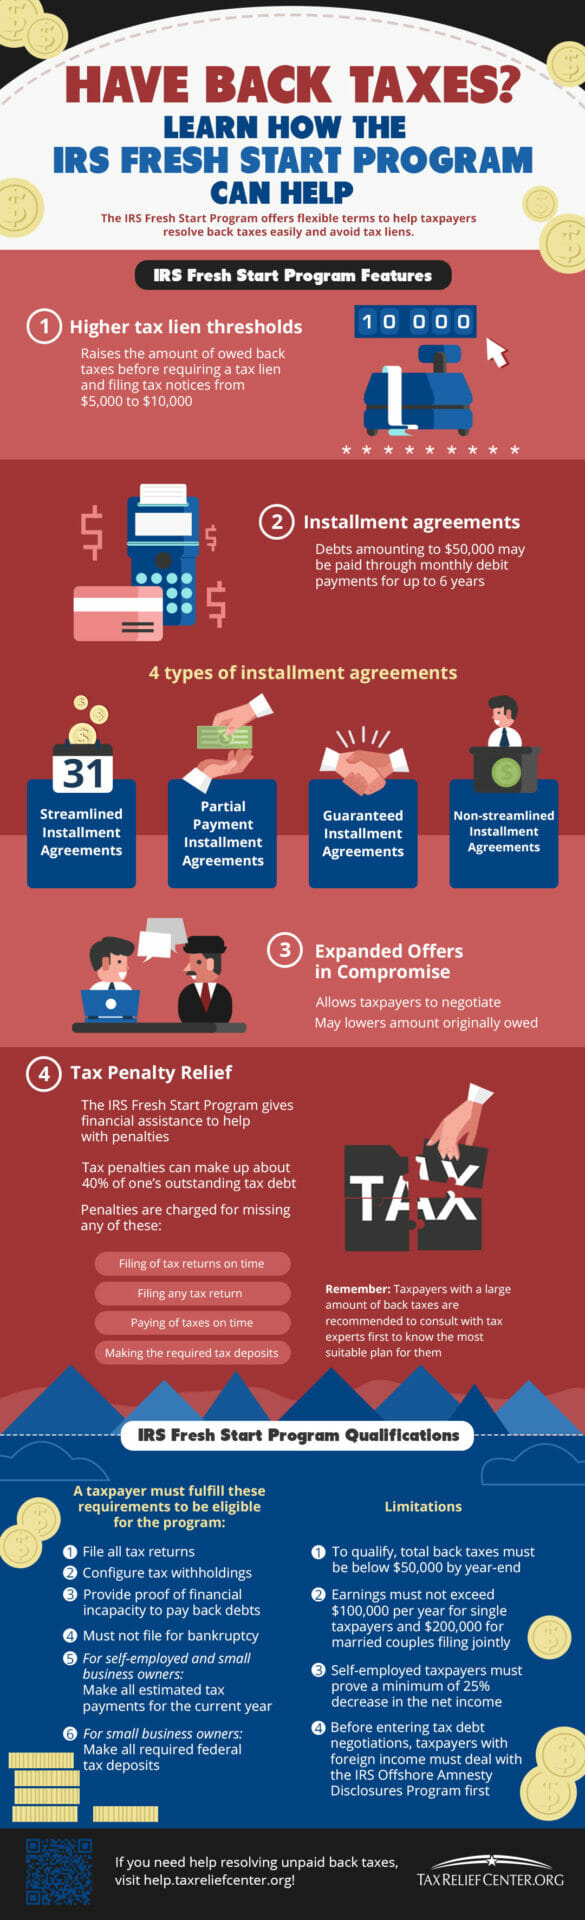 infographic | The IRS Fresh Start Program | How Does It Work?